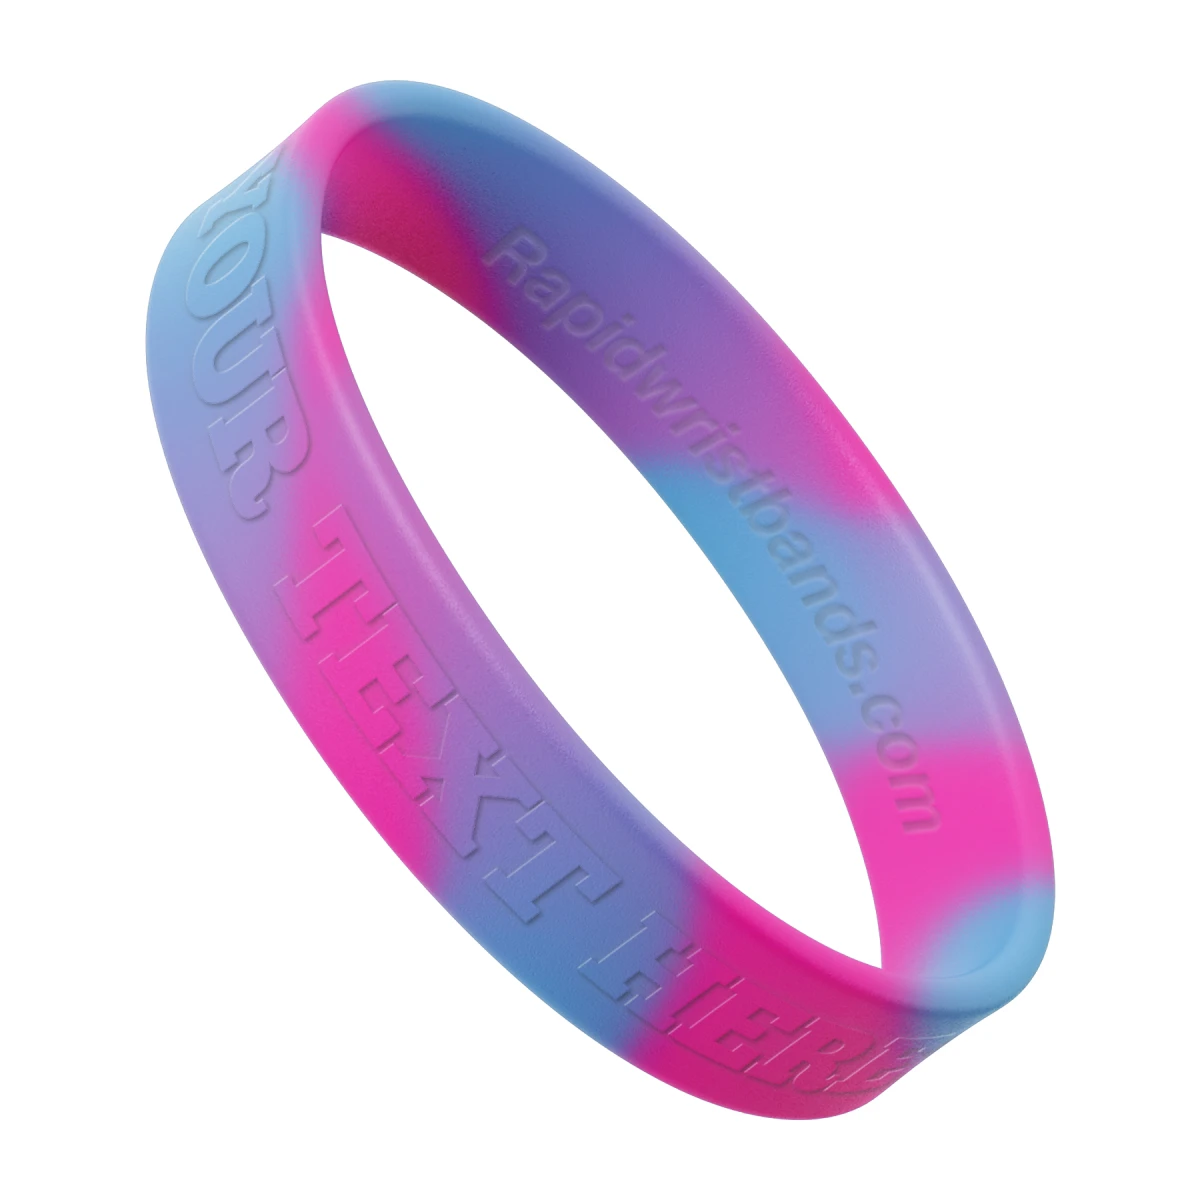 Swirl Light Blue/Hot Pink Wristband With Your Text Here Embossed